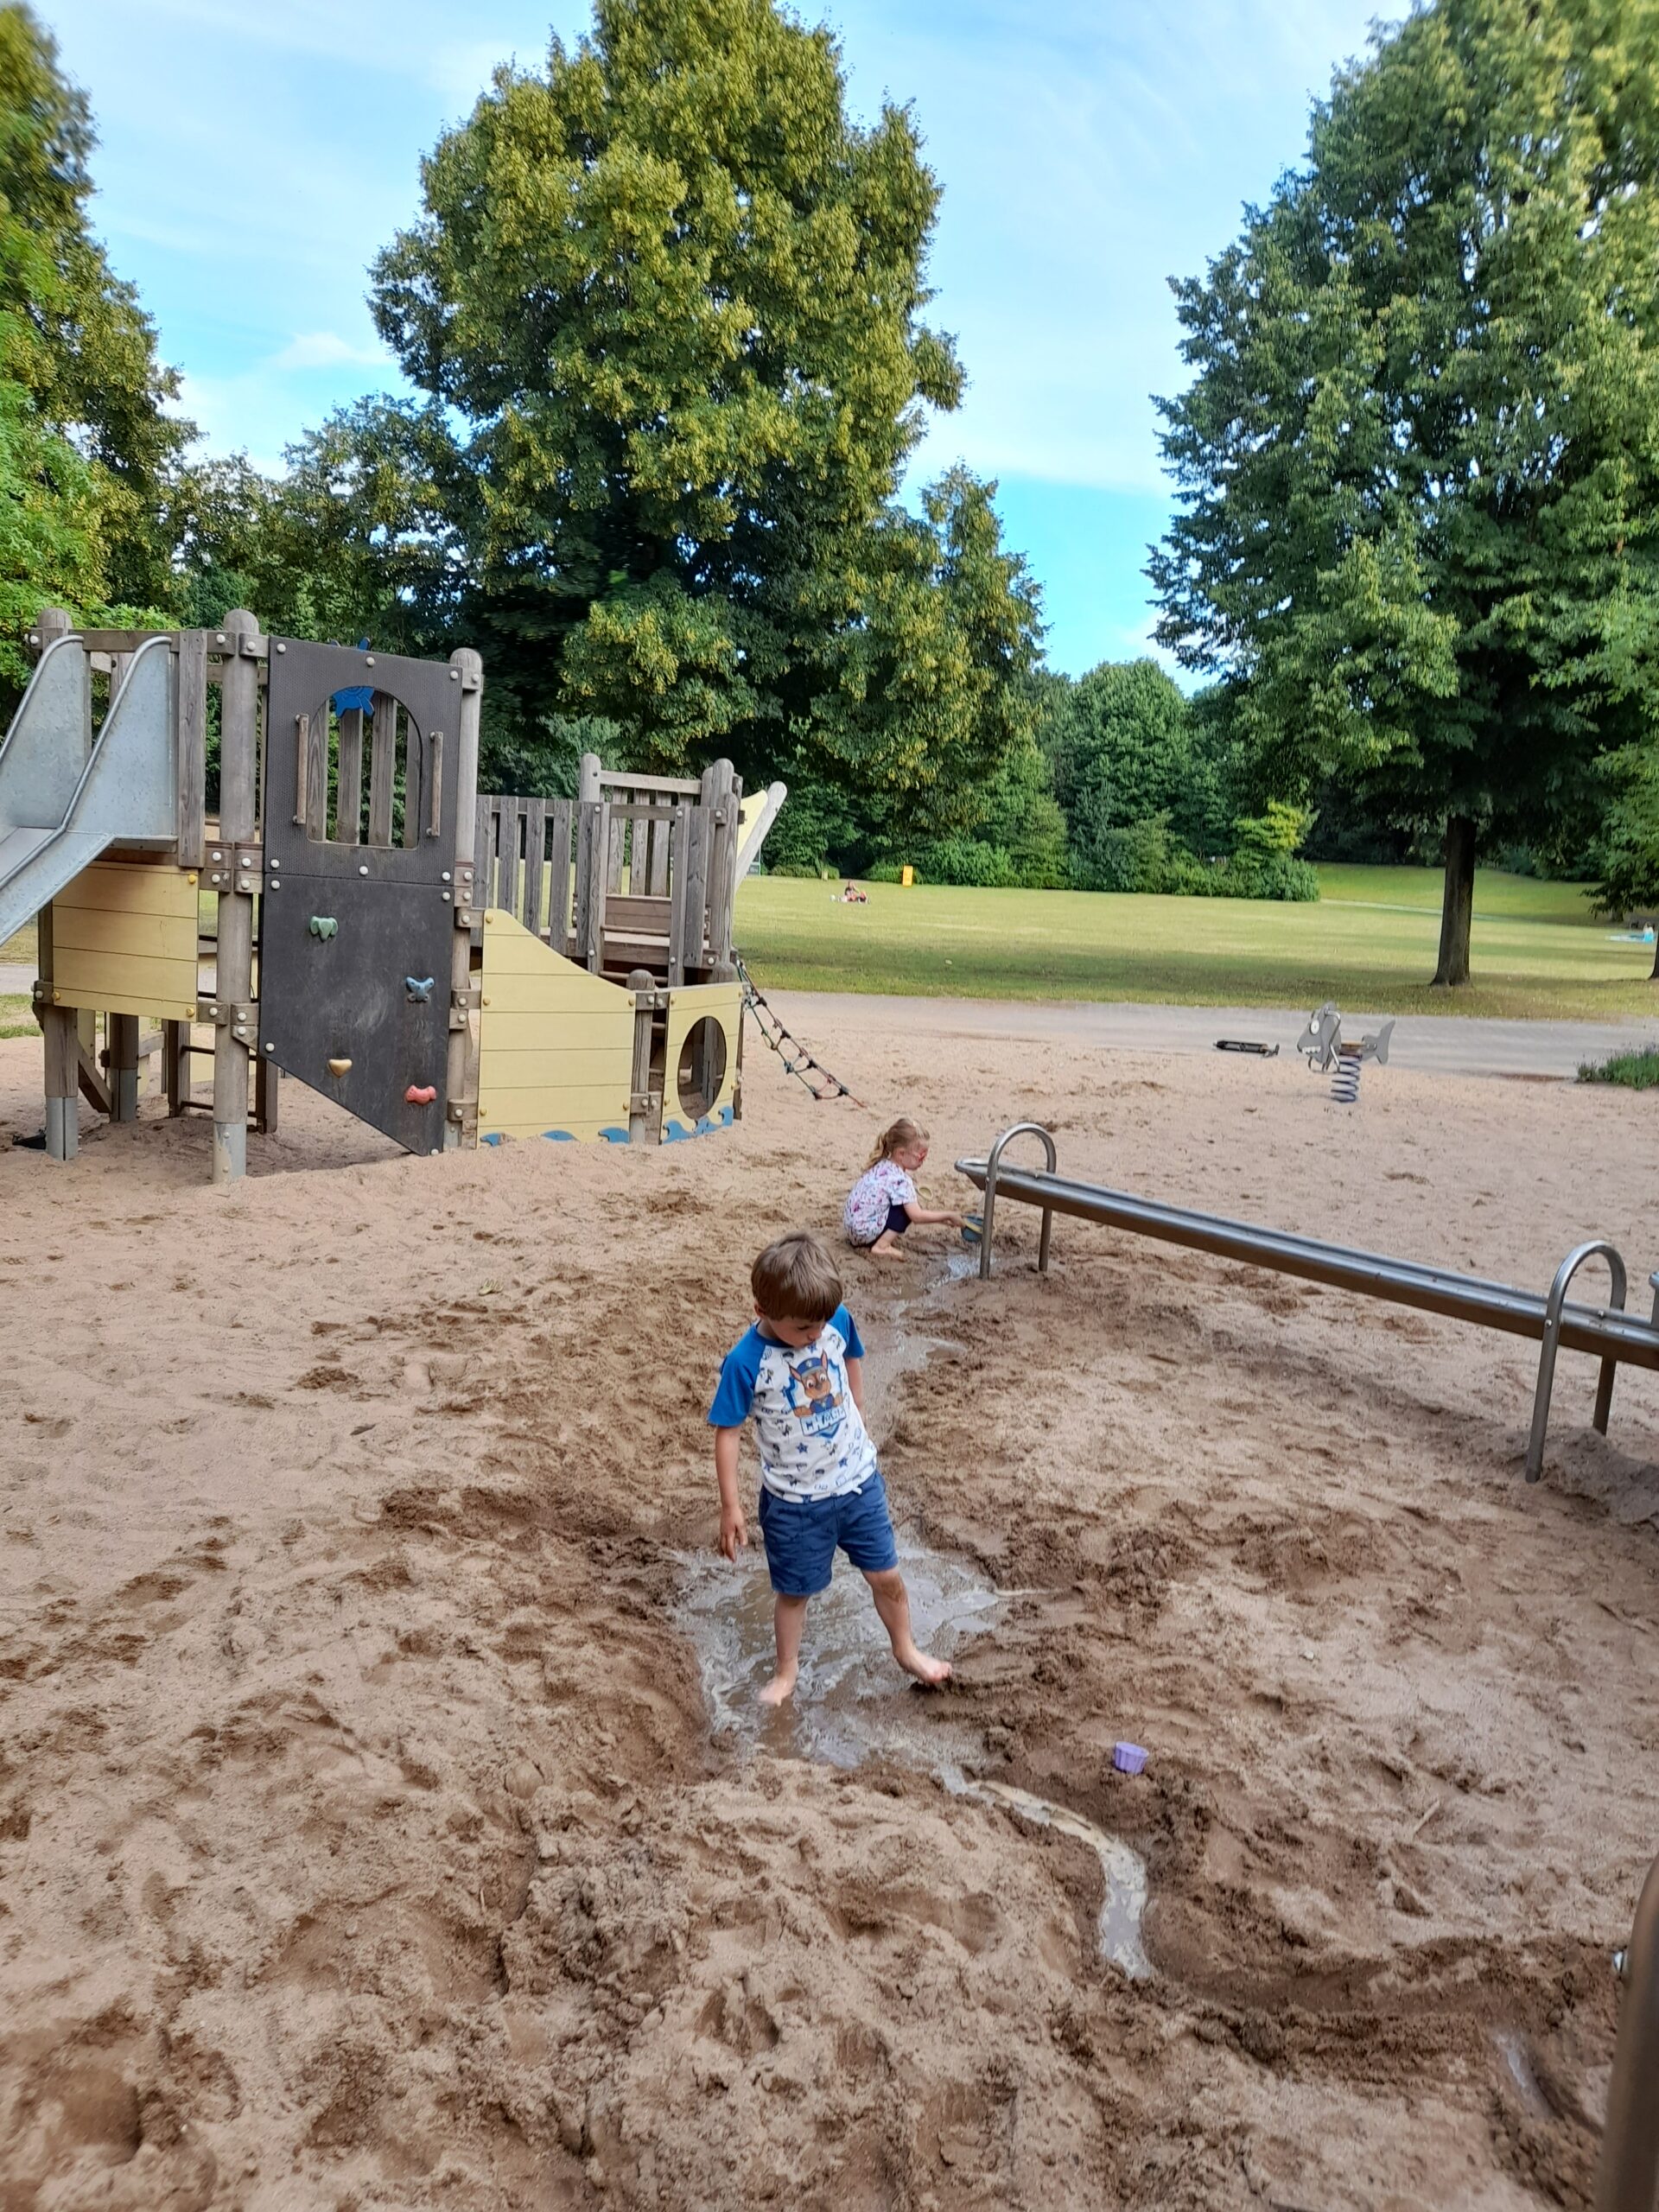 … Play at the Sand and Water Park?